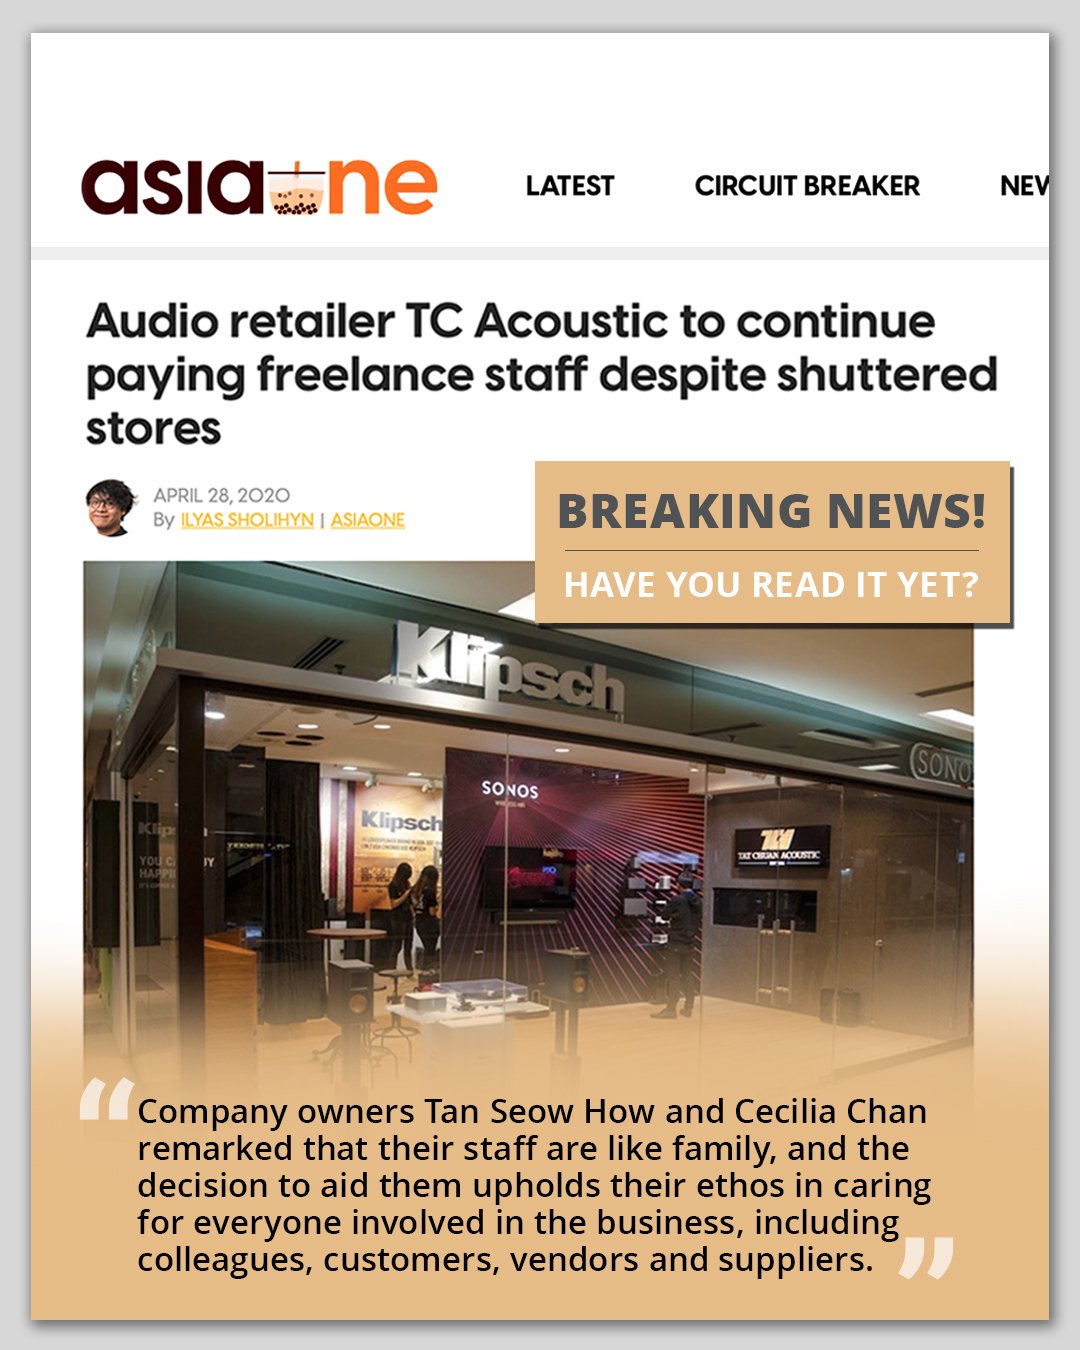 #TCcares featured on AsiaOne